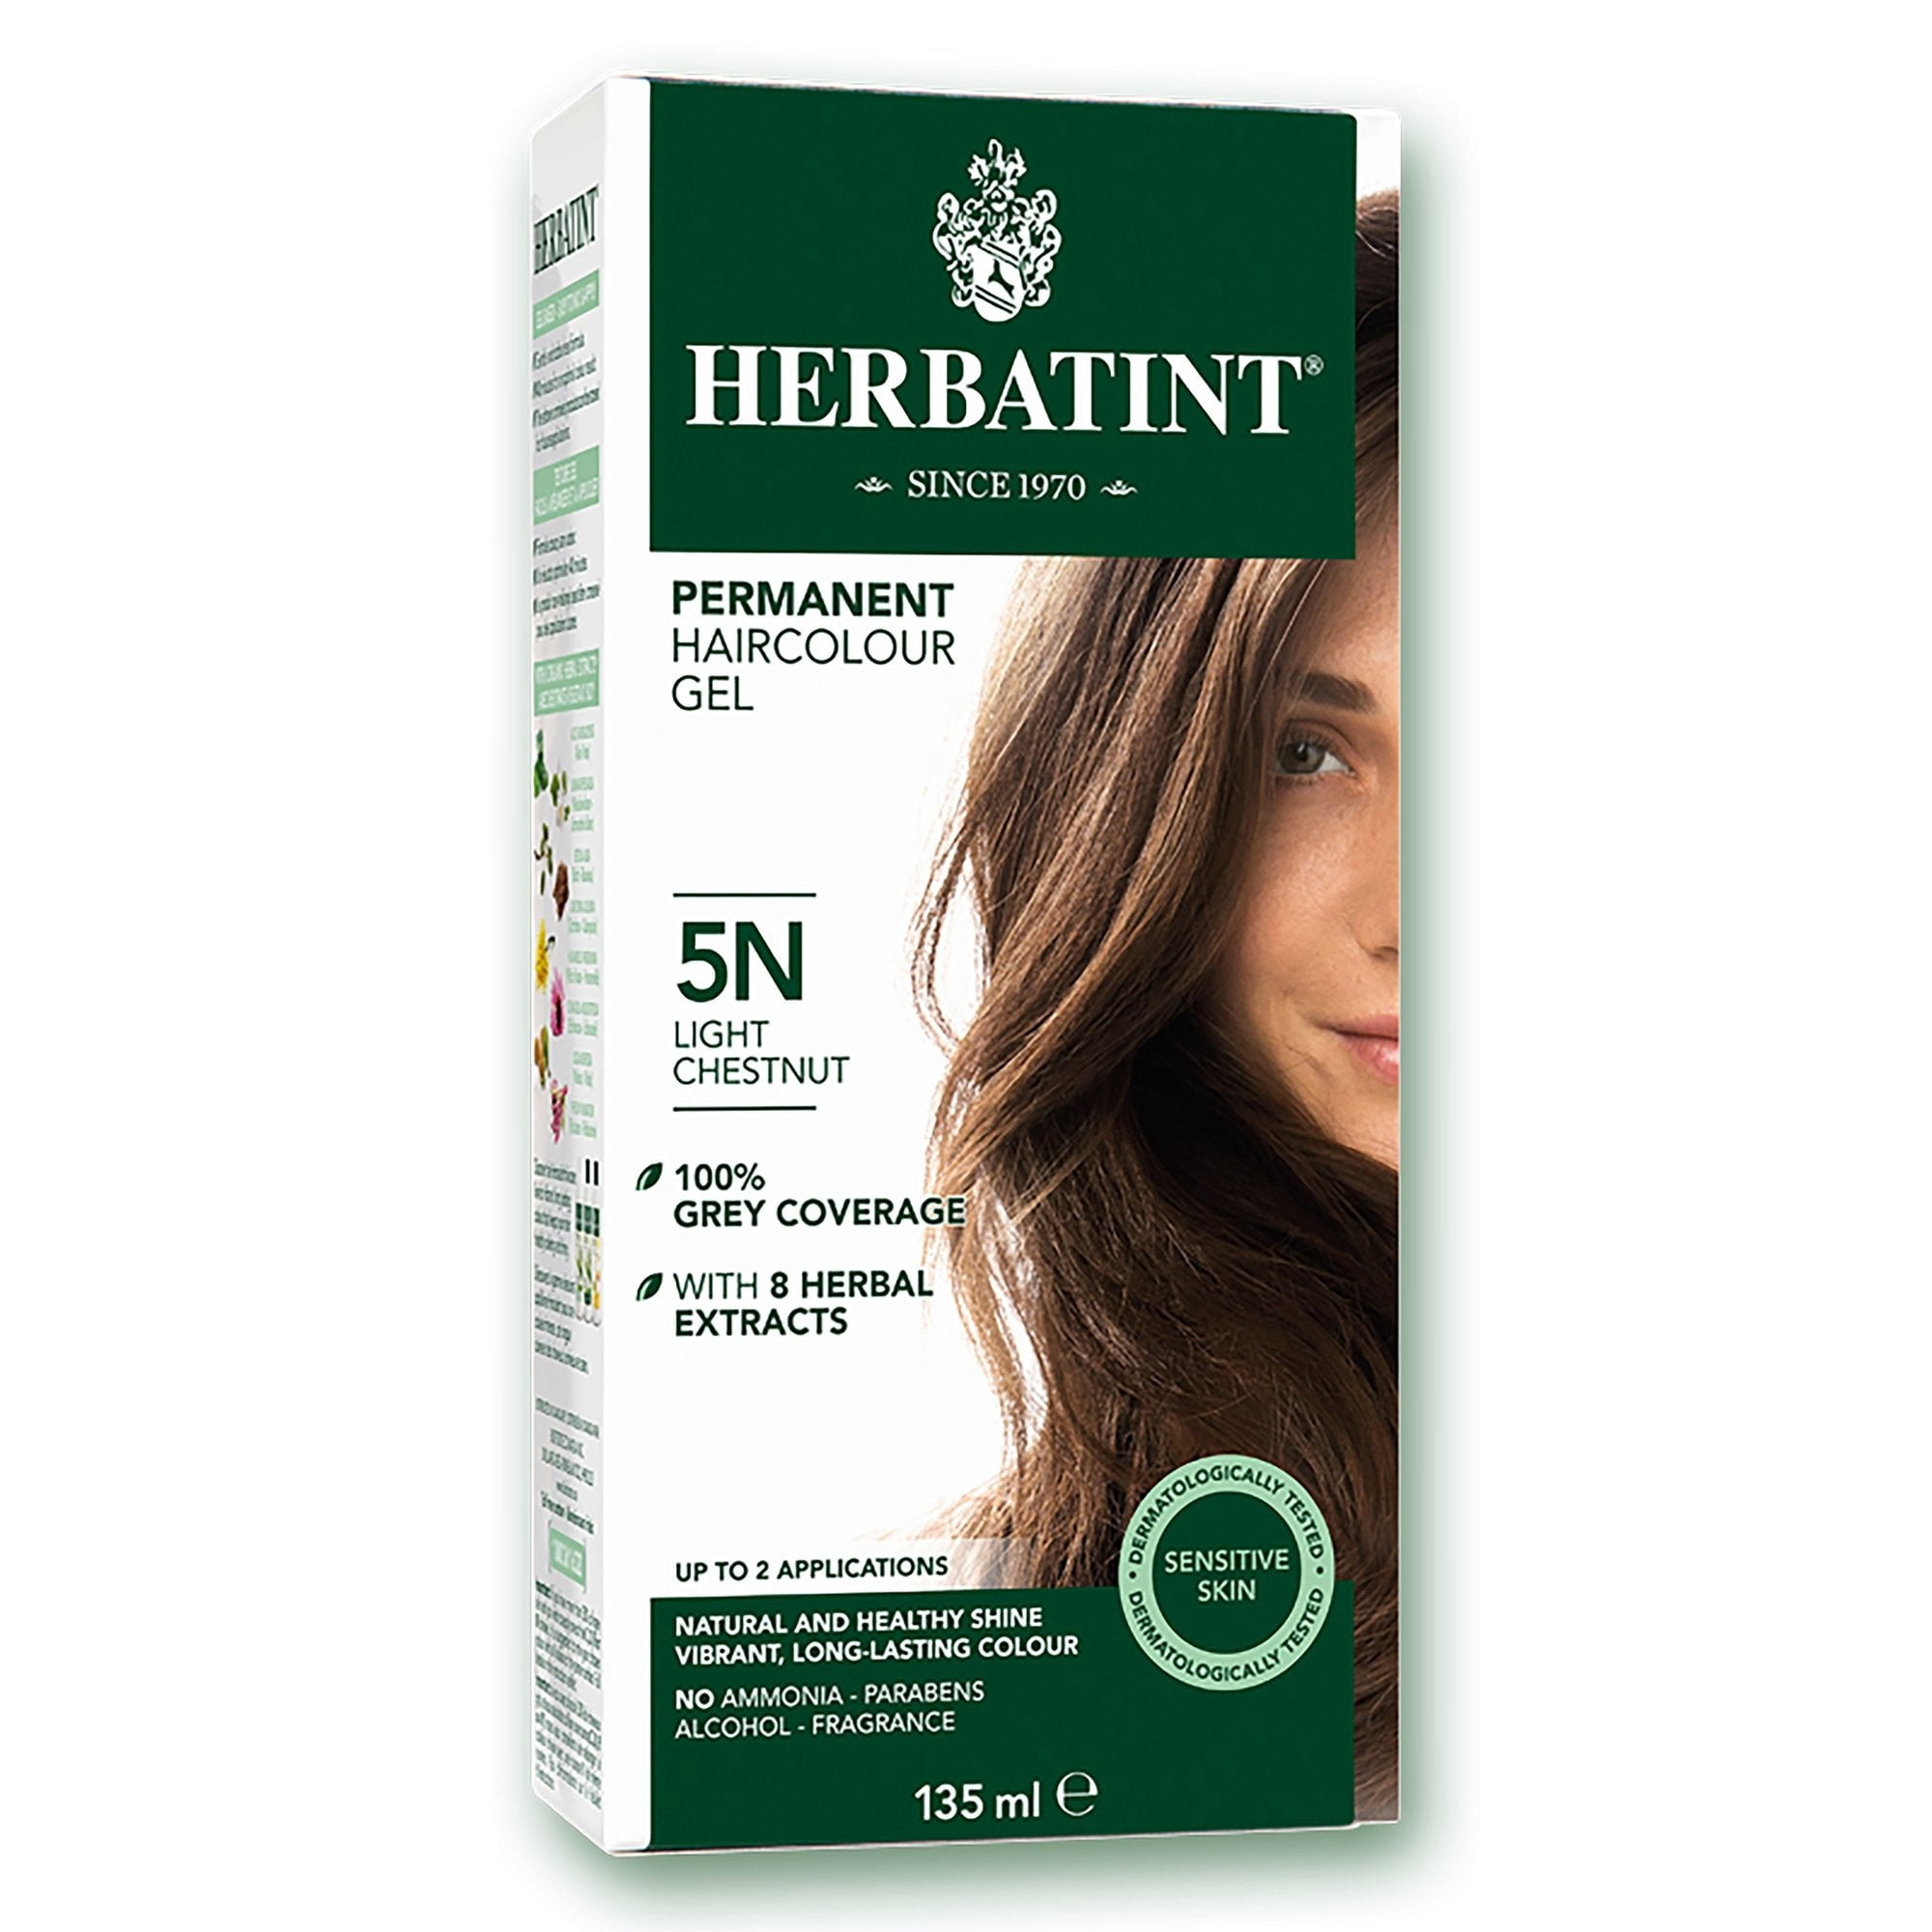 Herbatint Natural Permanent Herbal Hair Colour Gel 5N Light Chestnut 135mL  - Without ammonia and paraben. Suitable for Vegans | Walmart Canada